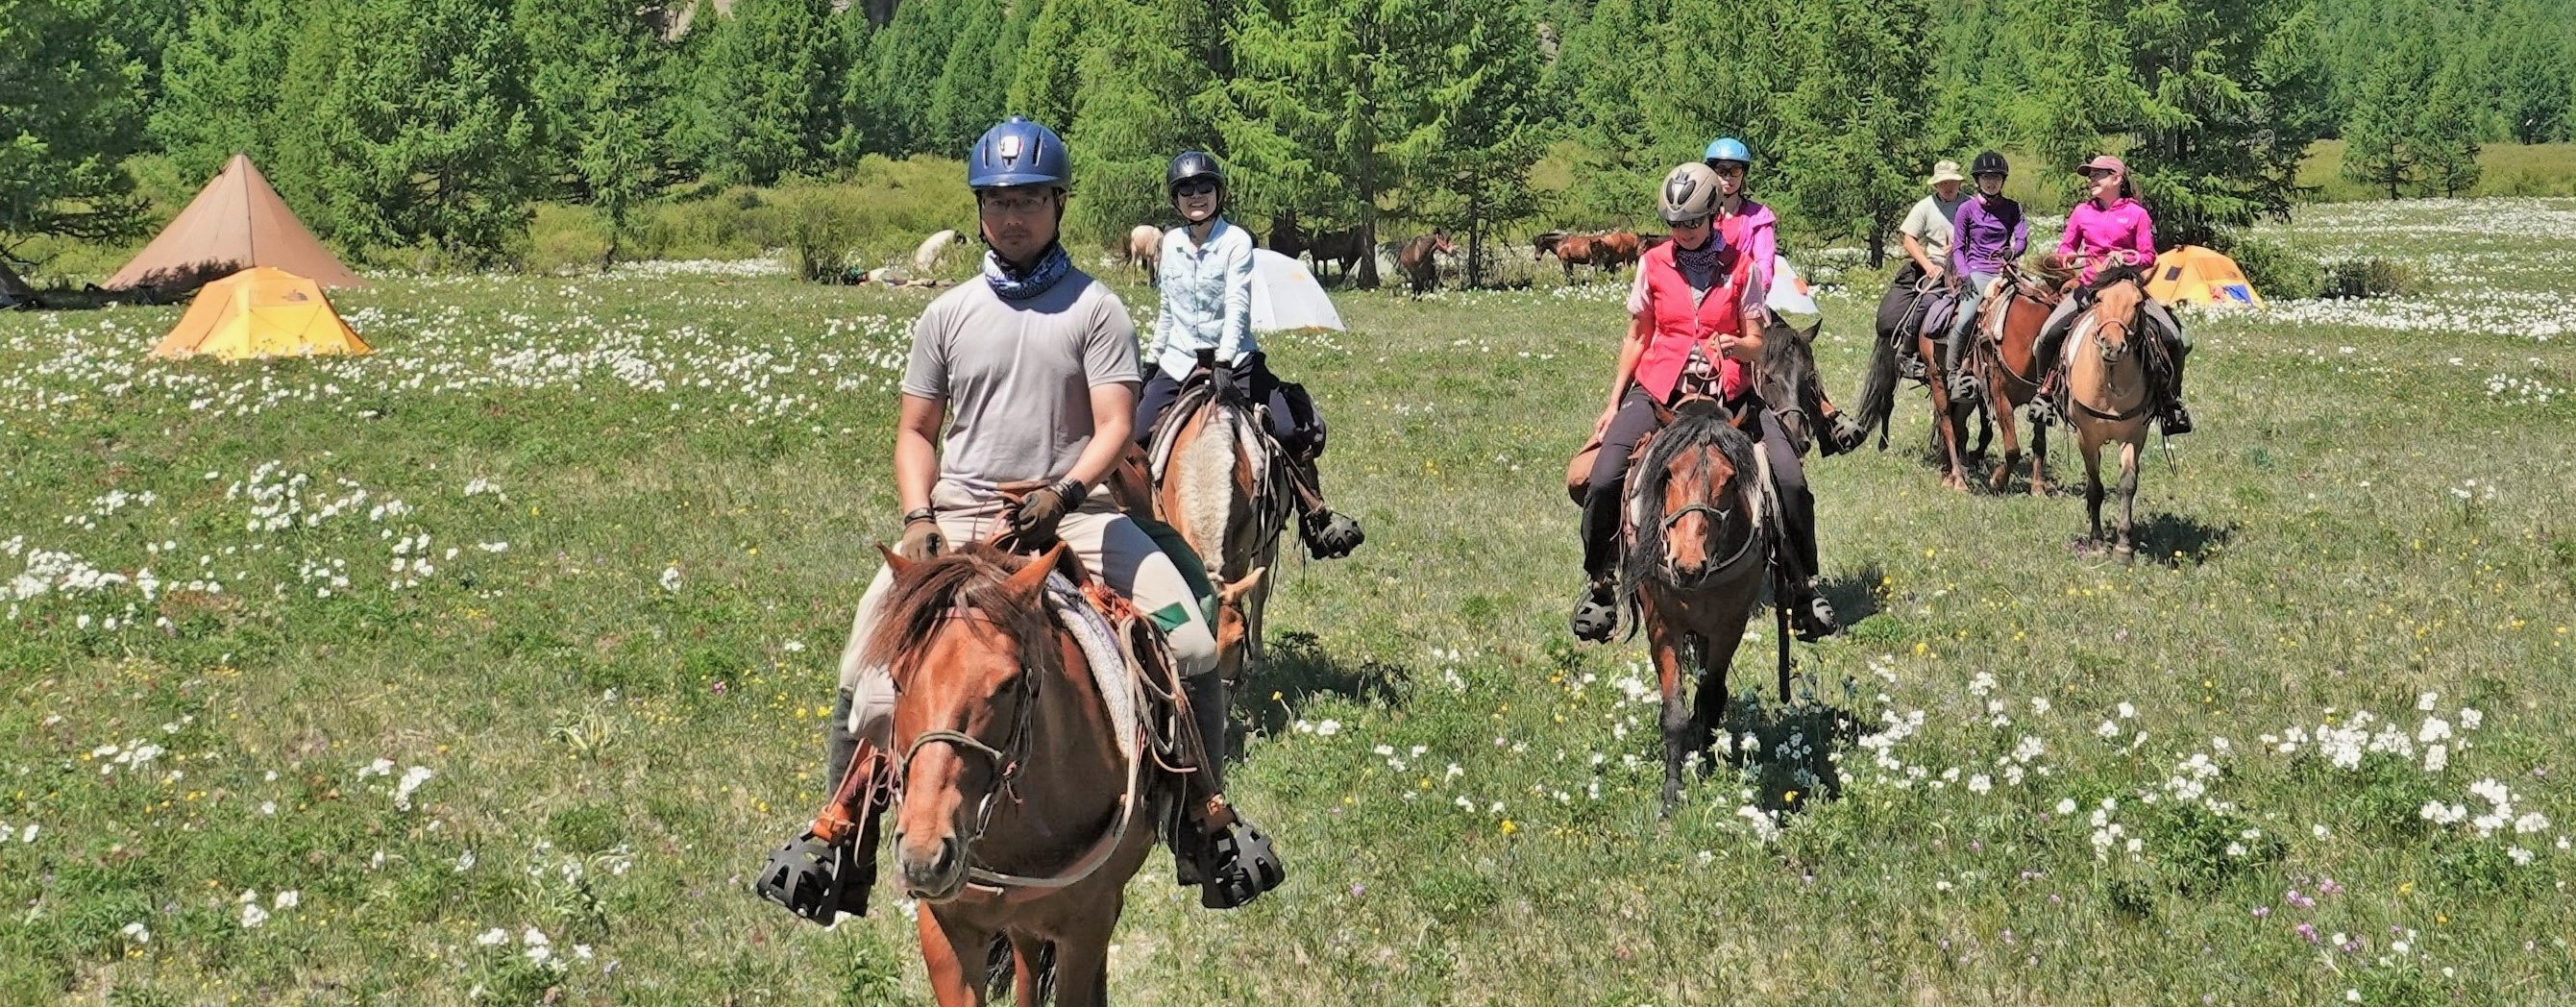 expeditions on horseback in Mongolia. Stone Horse Expeditions